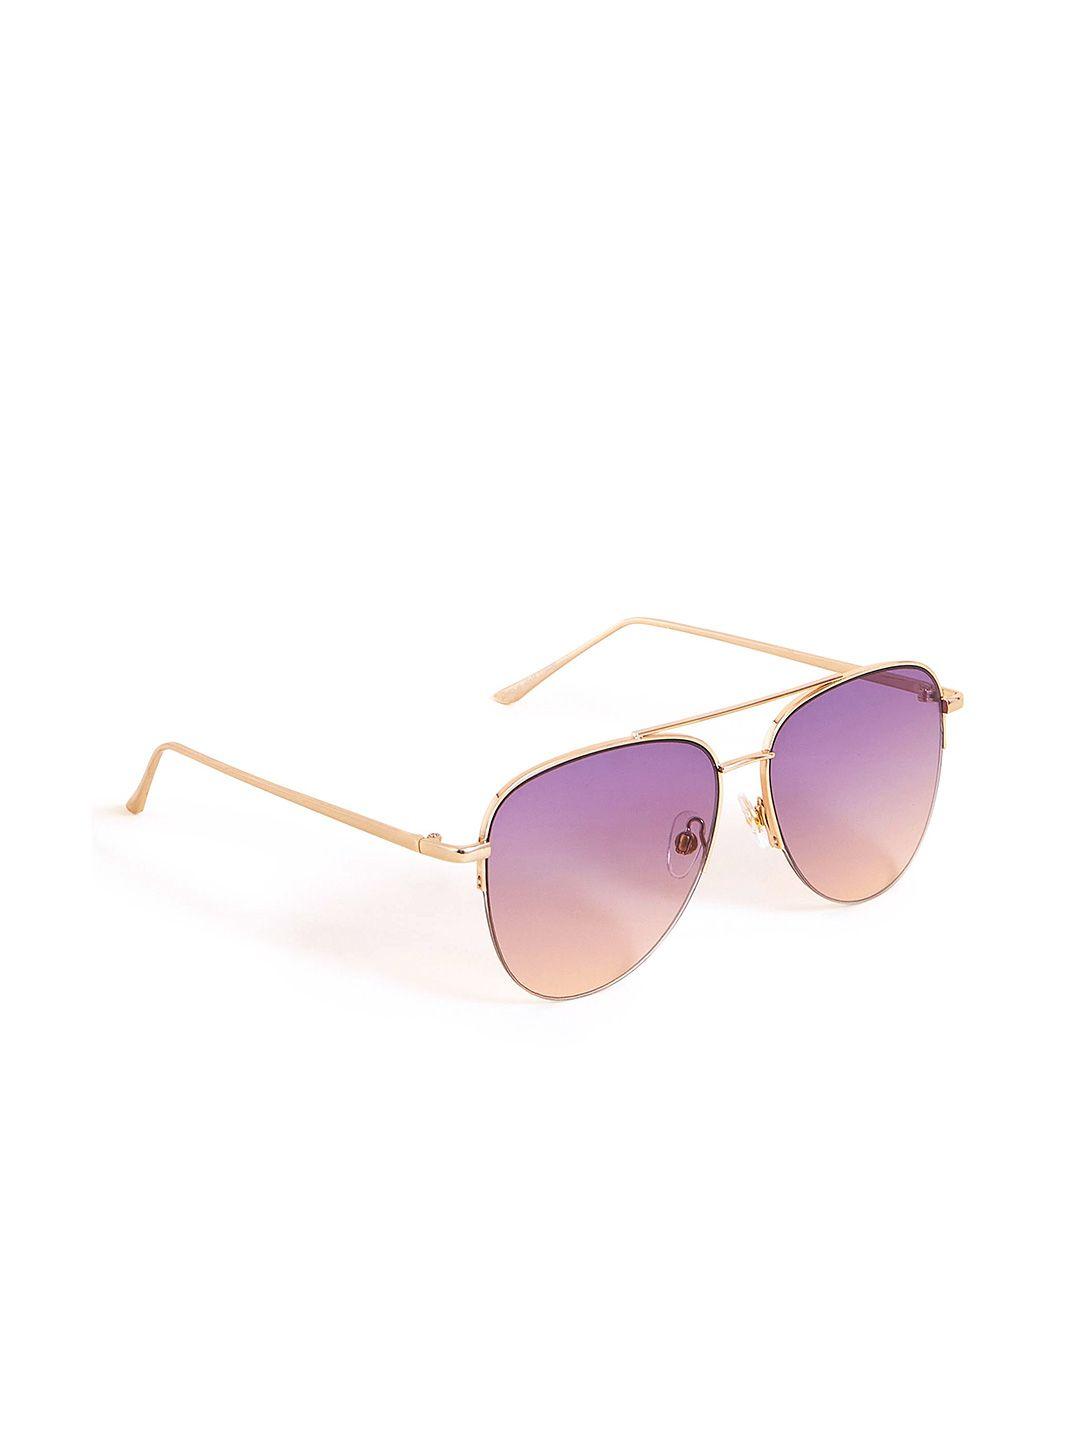 accessorize women aviator sunglasses with uv protected lens ma-59301750001